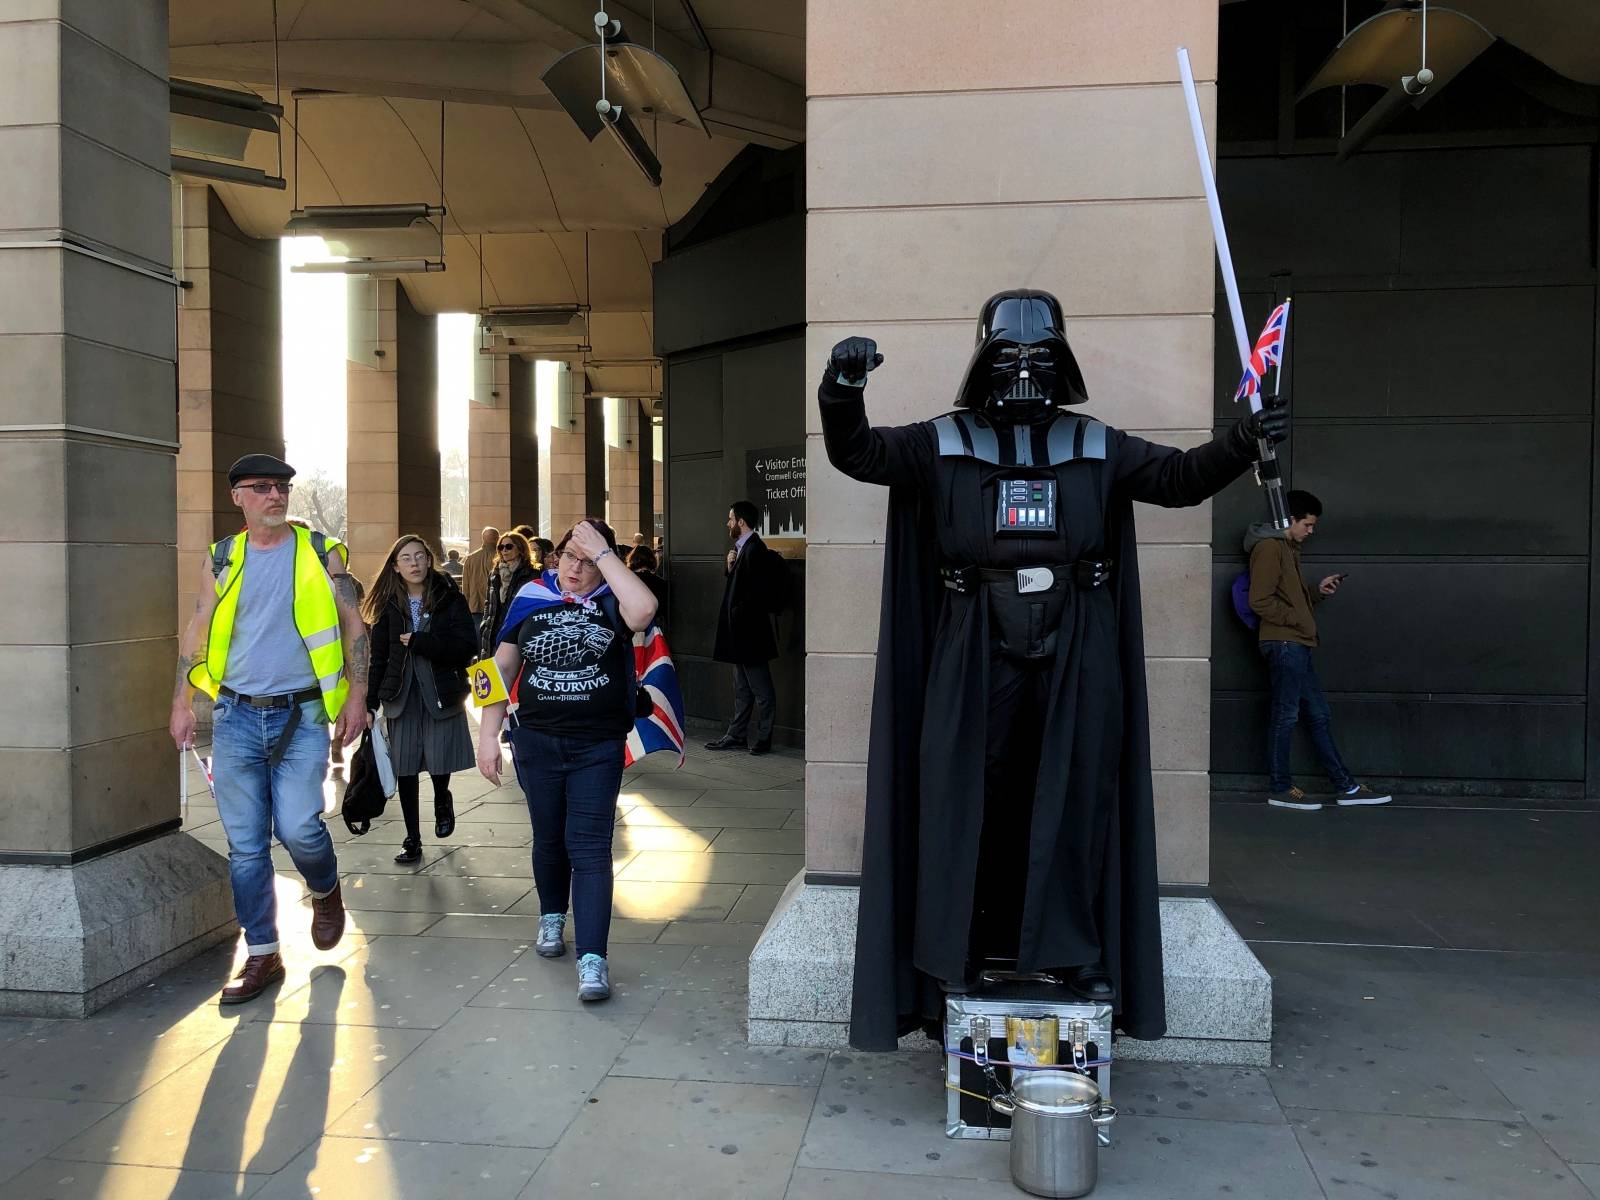 A man dressed as Darth Vader poses with a Union Jack near the pro-Brexit demonstration in Parliament Square, in London